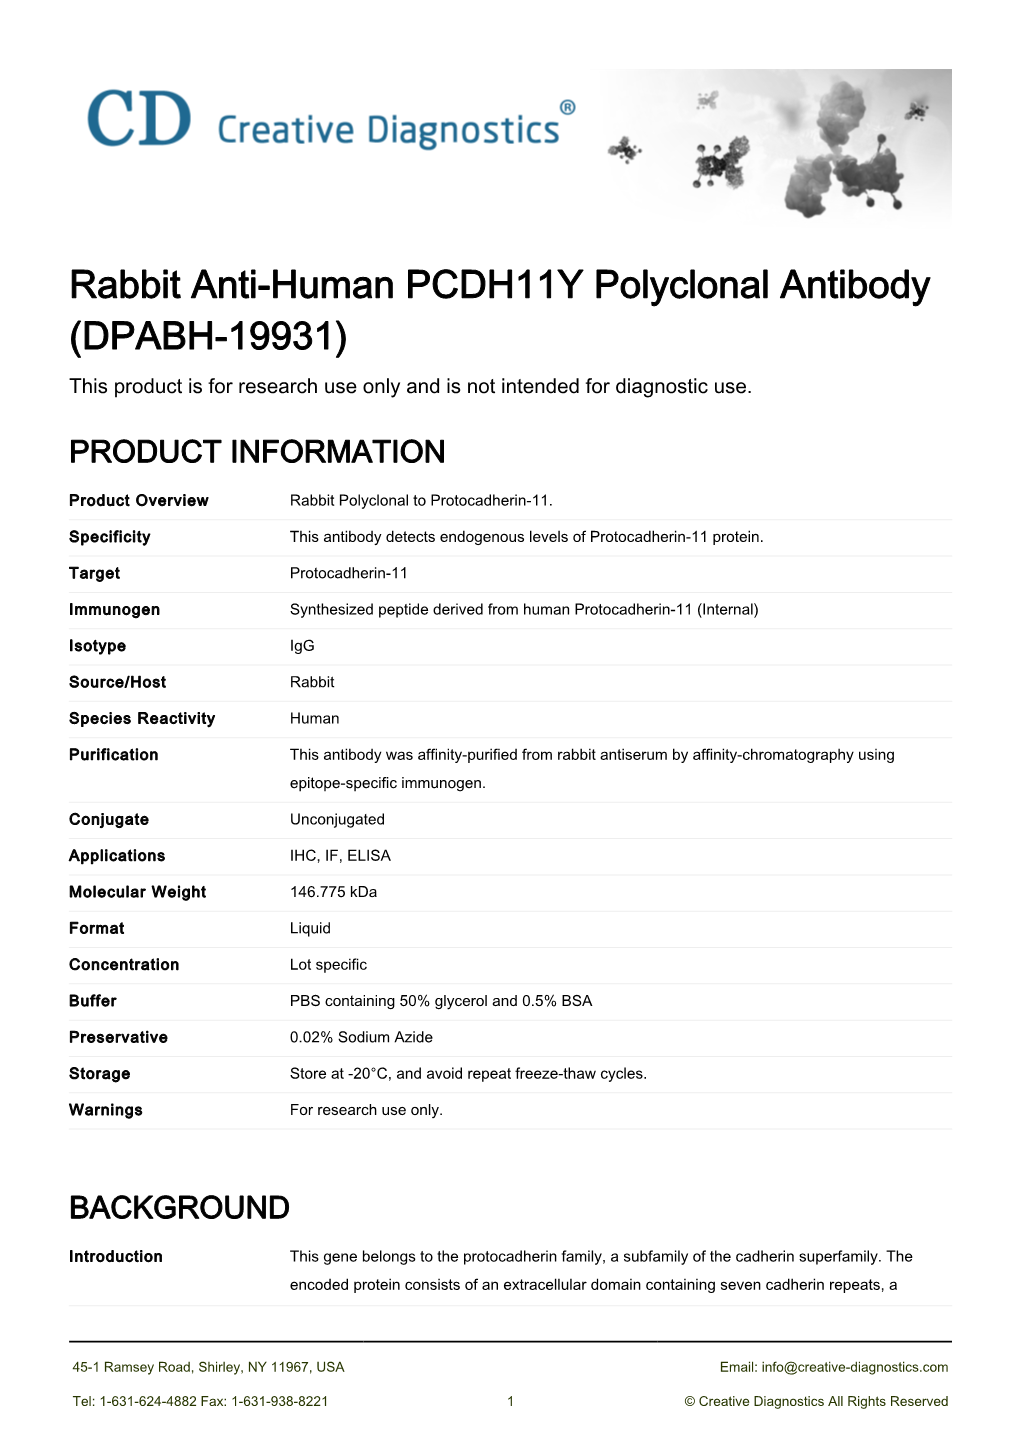 Rabbit Anti-Human PCDH11Y Polyclonal Antibody (DPABH-19931) This Product Is for Research Use Only and Is Not Intended for Diagnostic Use